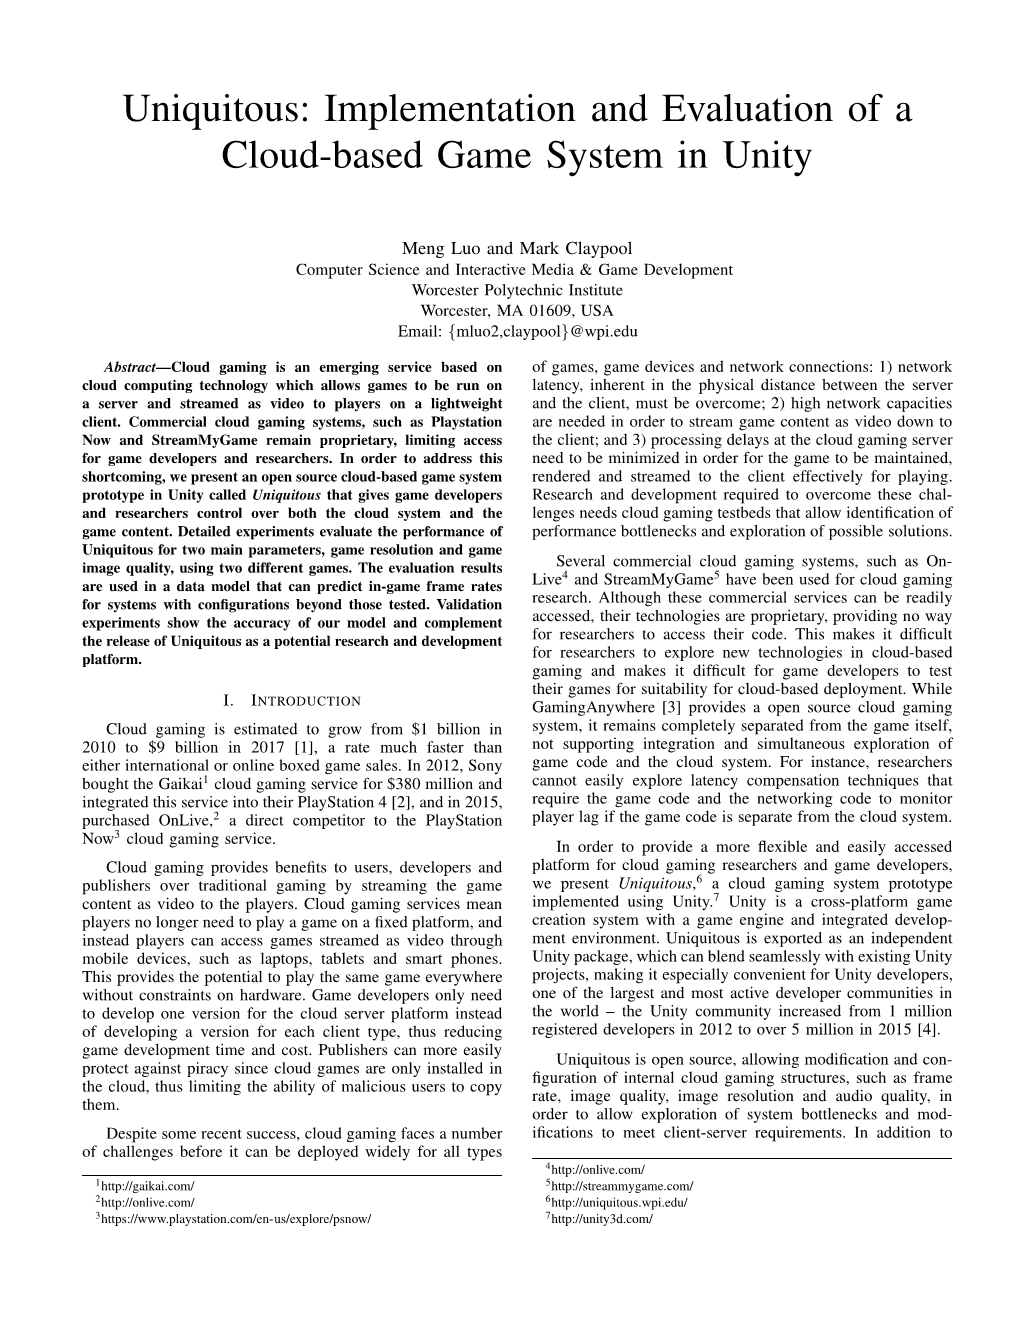 Uniquitous: Implementation and Evaluation of a Cloud-Based Game System in Unity